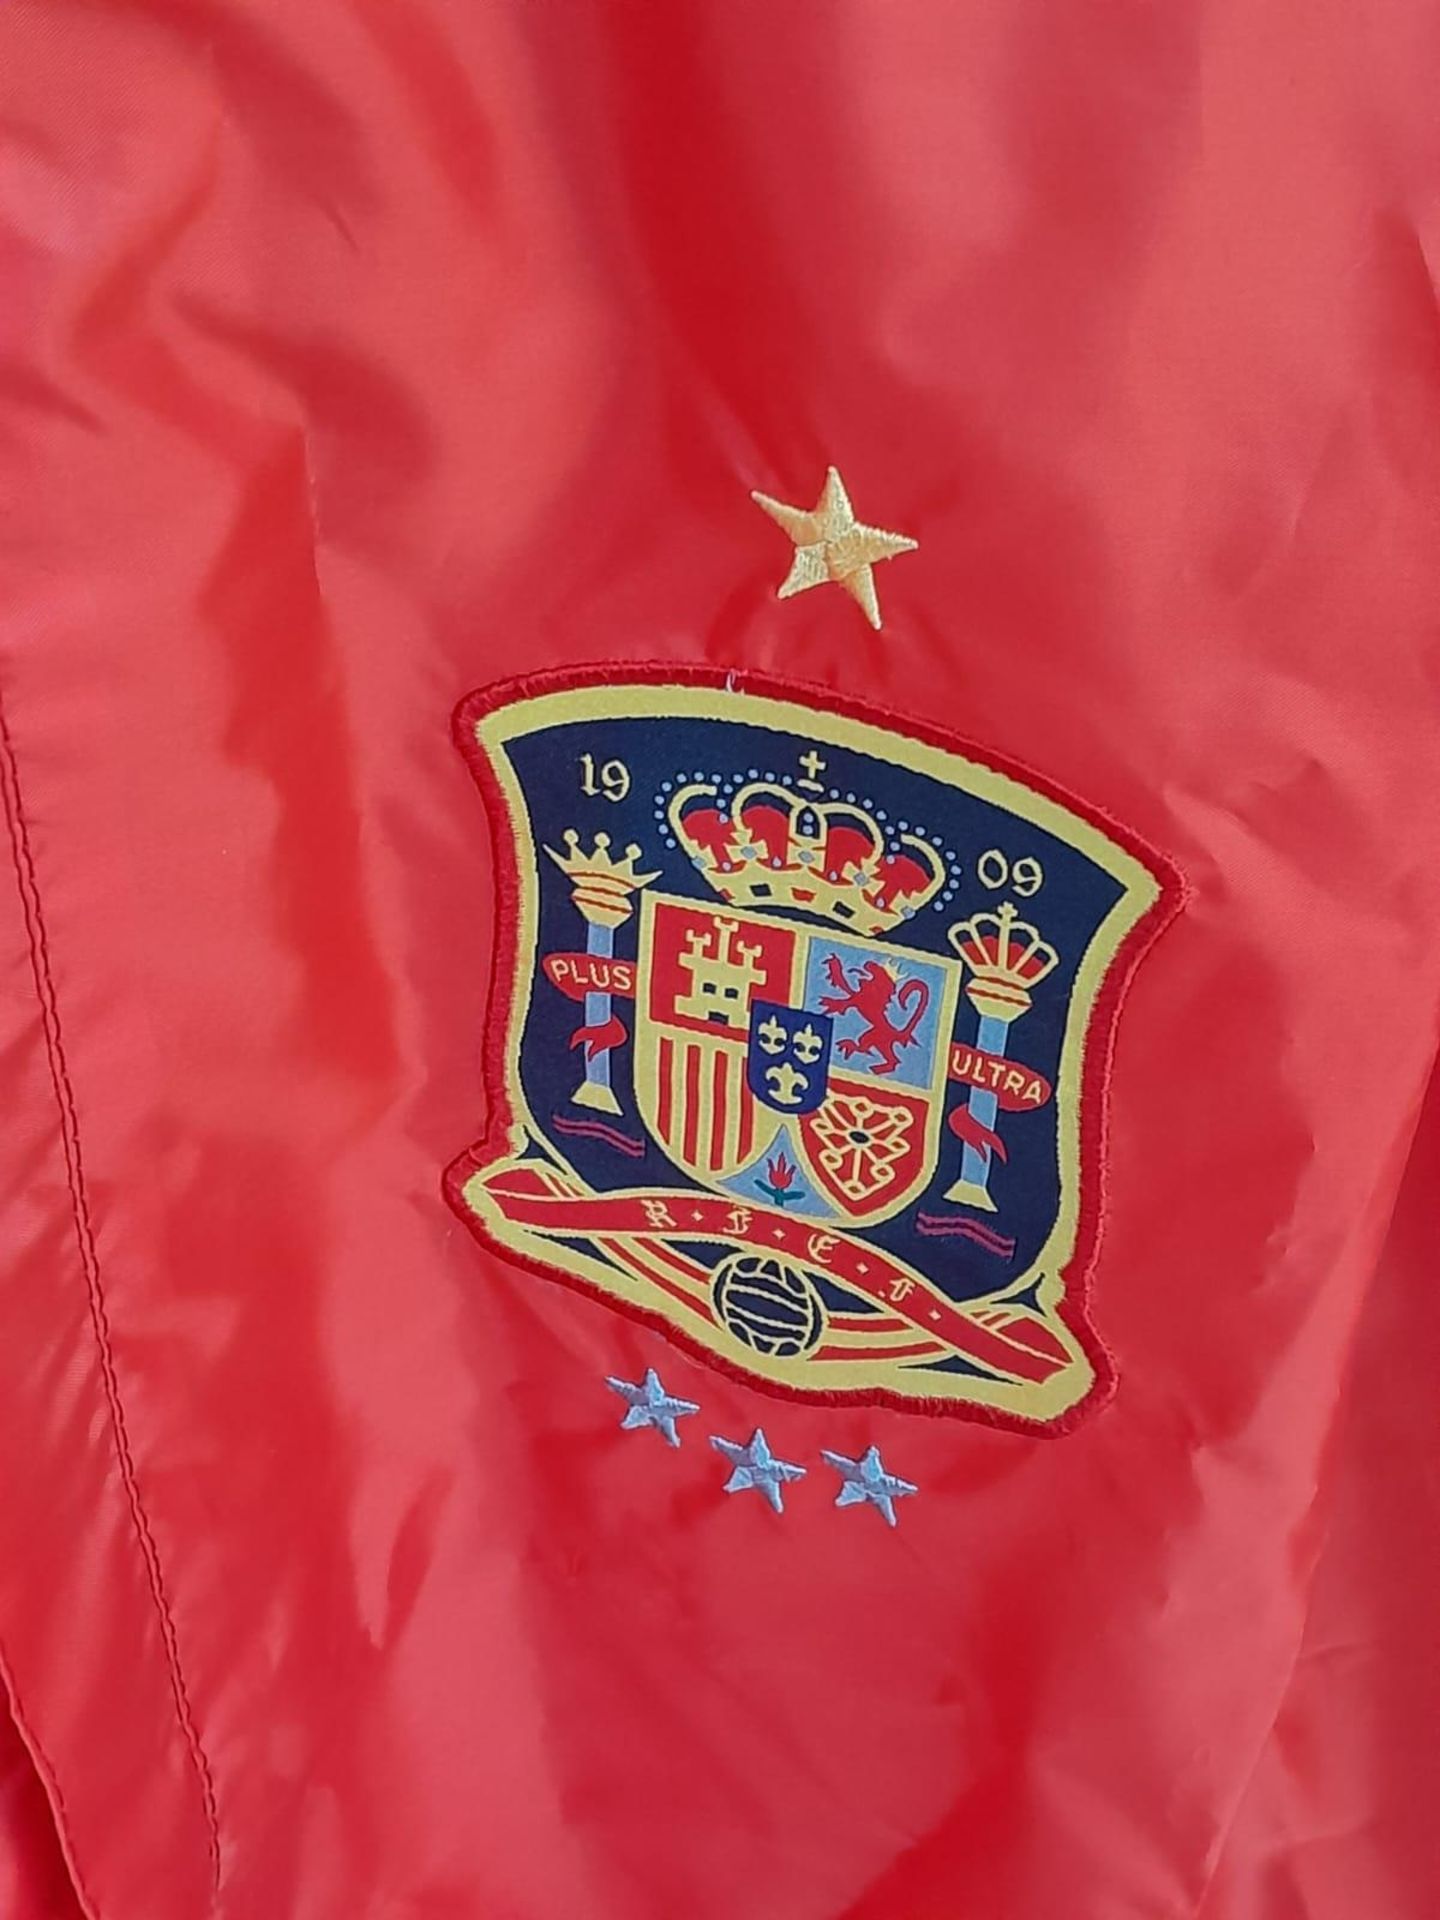 A Spain National Football Team Windbreaker Jacket (licensed). As new with tag. XL - Image 3 of 5